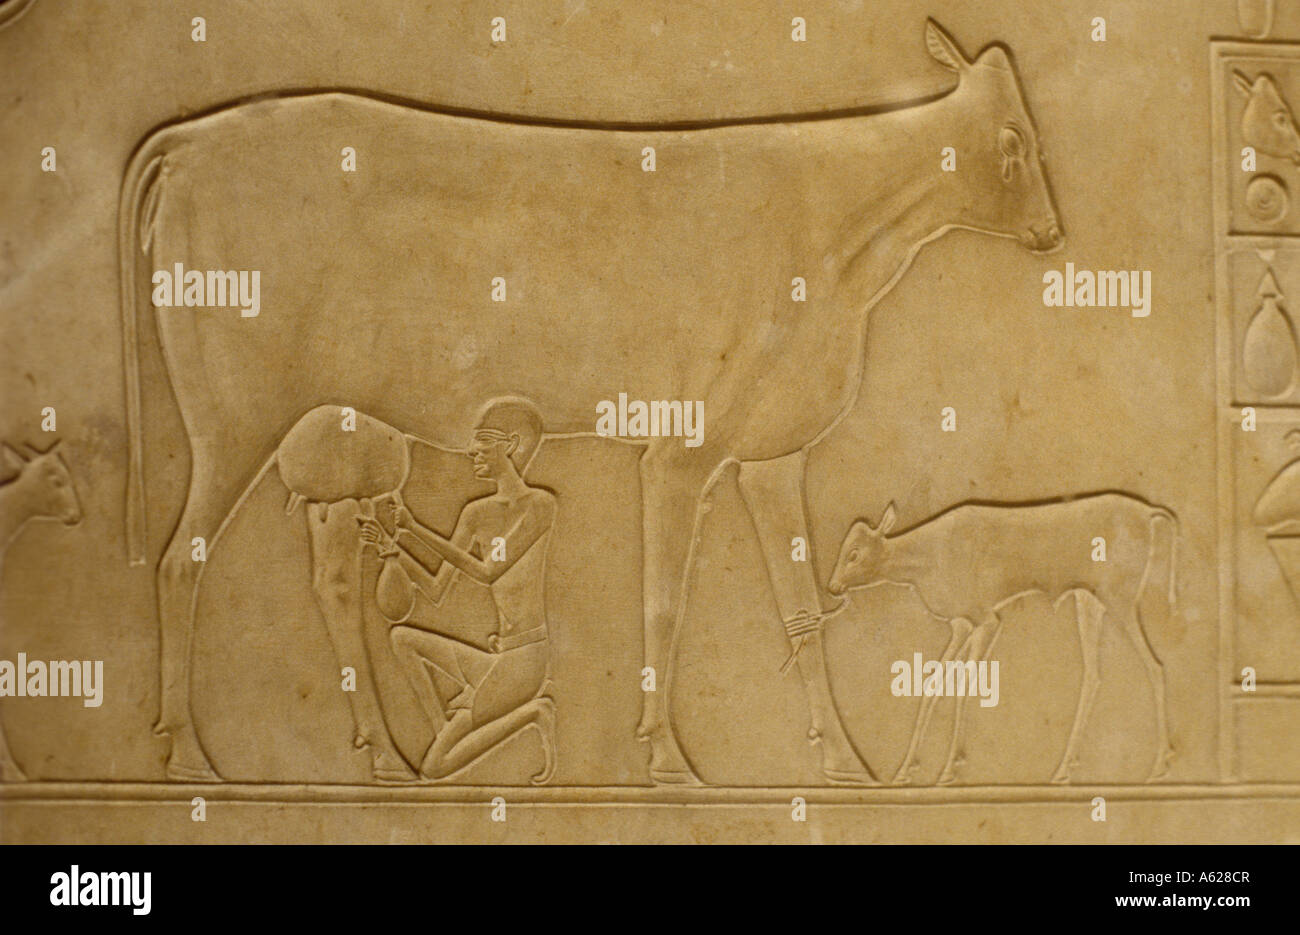 Relief stone carving of man milking cow with calf tethered nearby Egyptian Museum of Antiquities Cairo Egypt Stock Photo